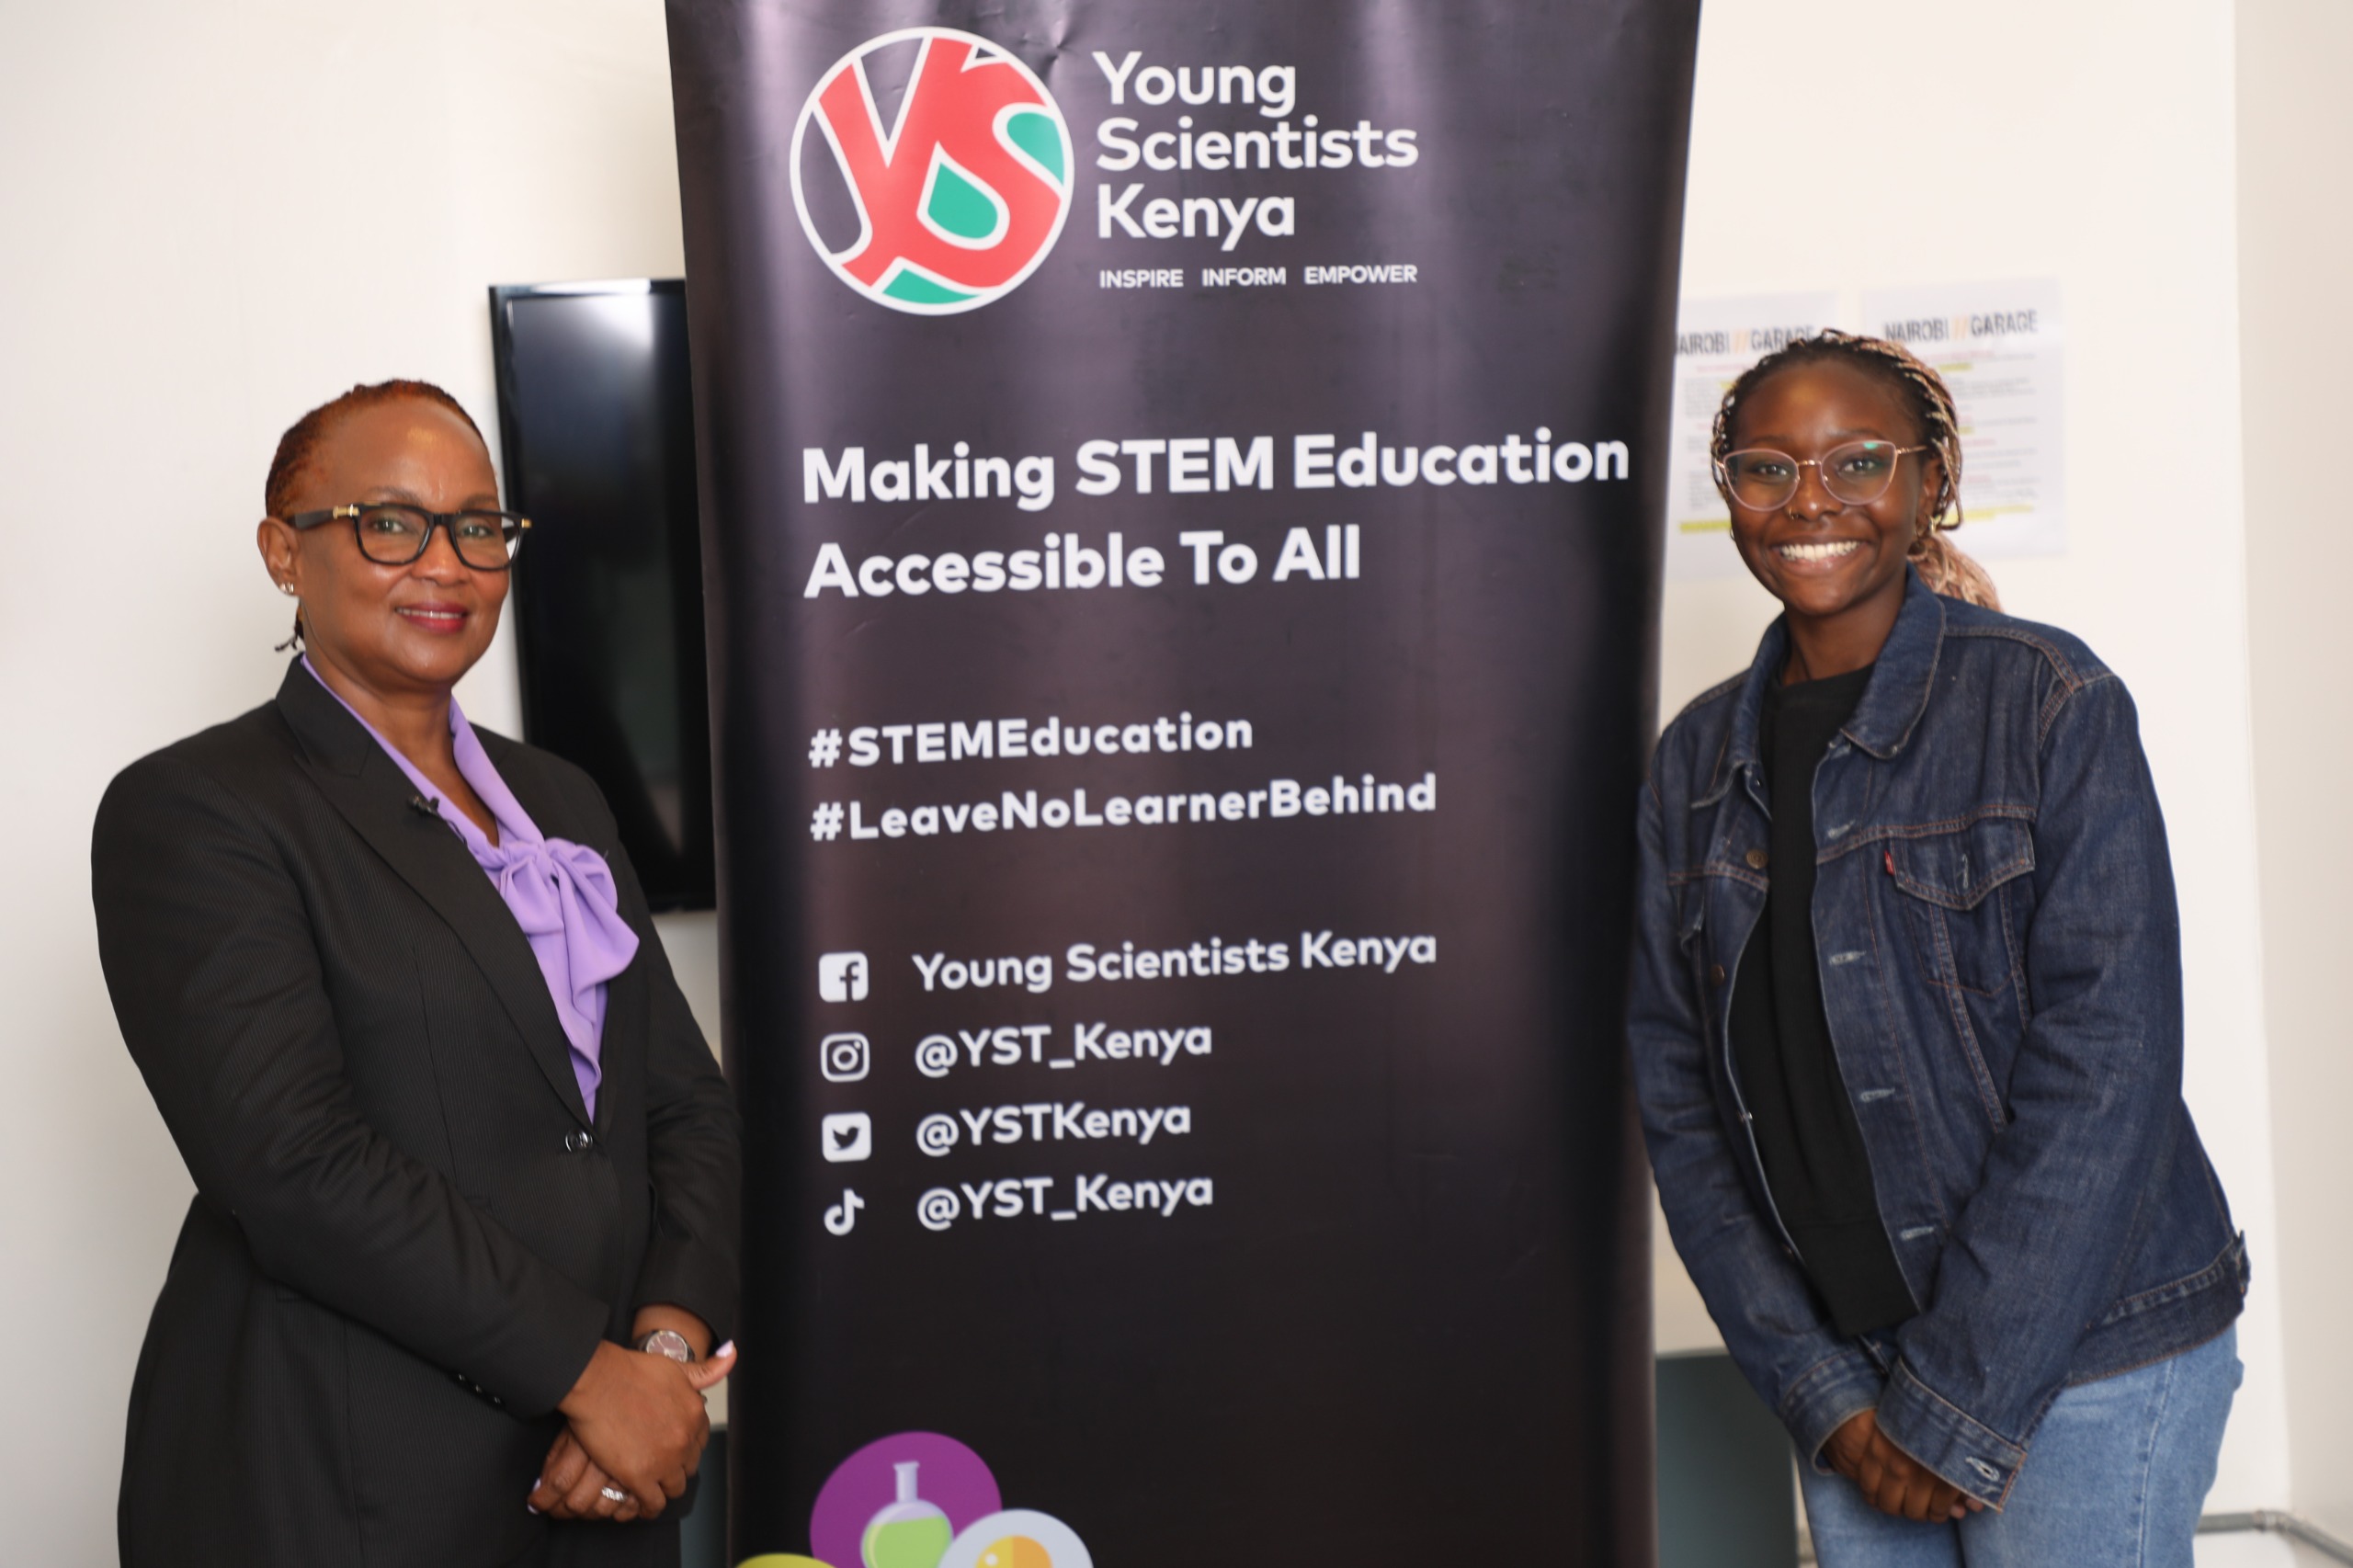 NDU- K SUPPORTS YOUNG SCIENTISTS IN KENYA